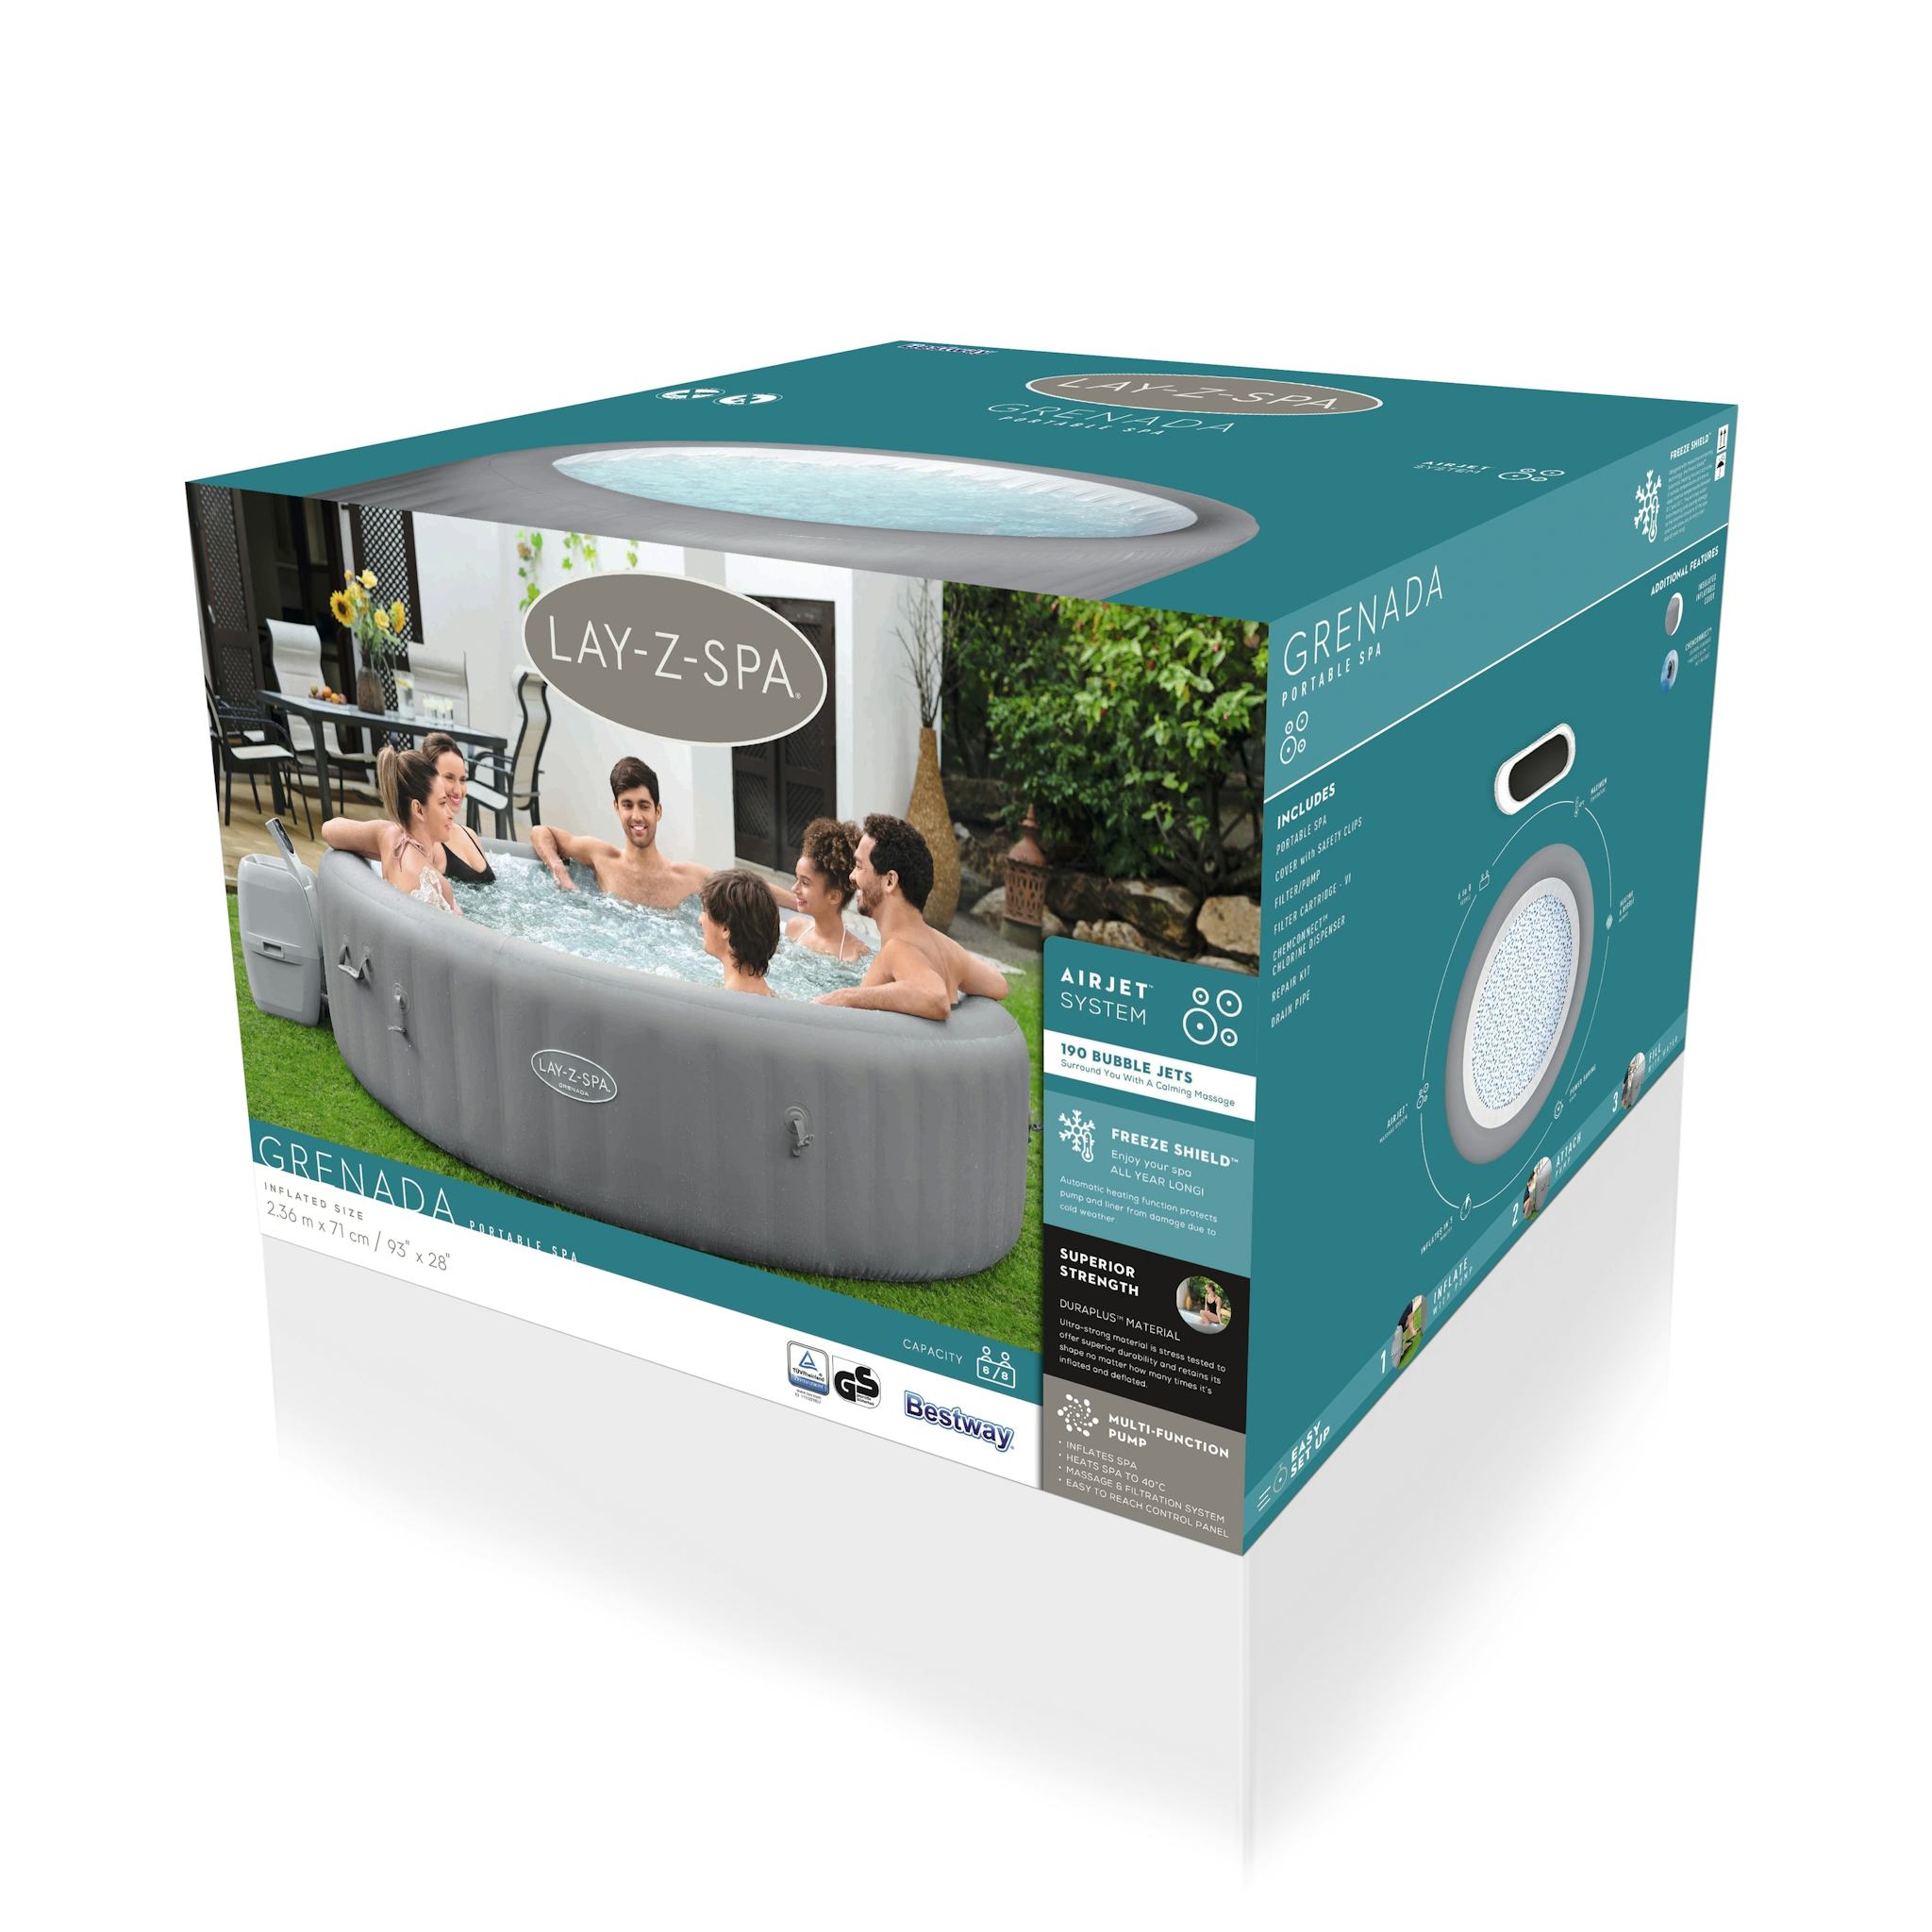 Spas Gonflables Spa gonflable rond Lay-Z-Spa Grenada Airjet™ 6 - 8 personnes Bestway 26